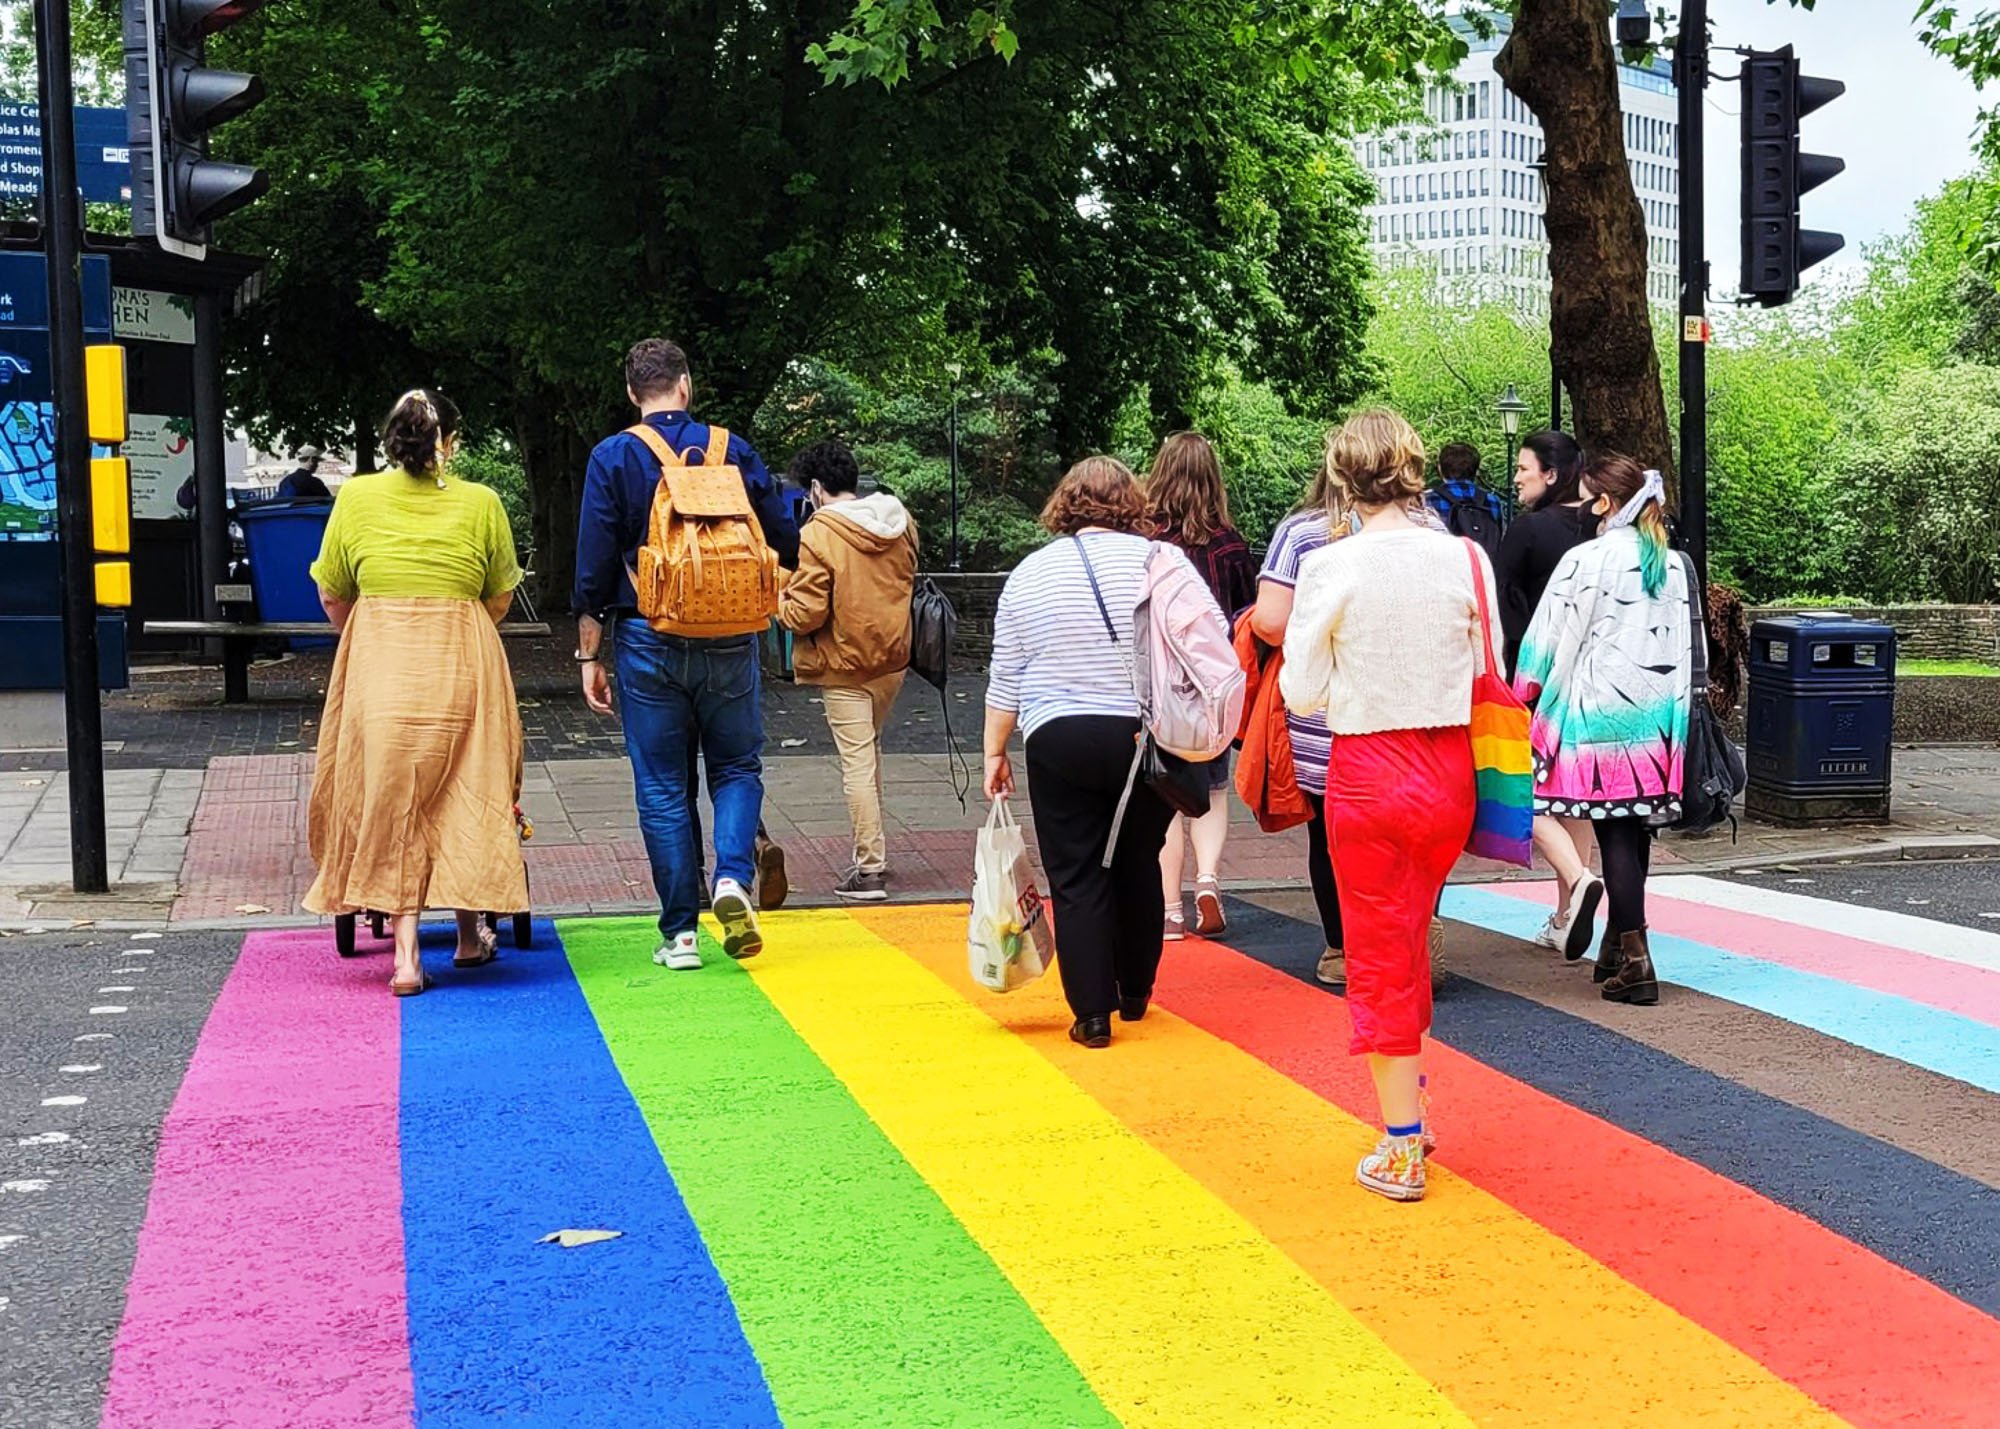 Pedestrians crossing a zebra crossing painted in rainbow colours.